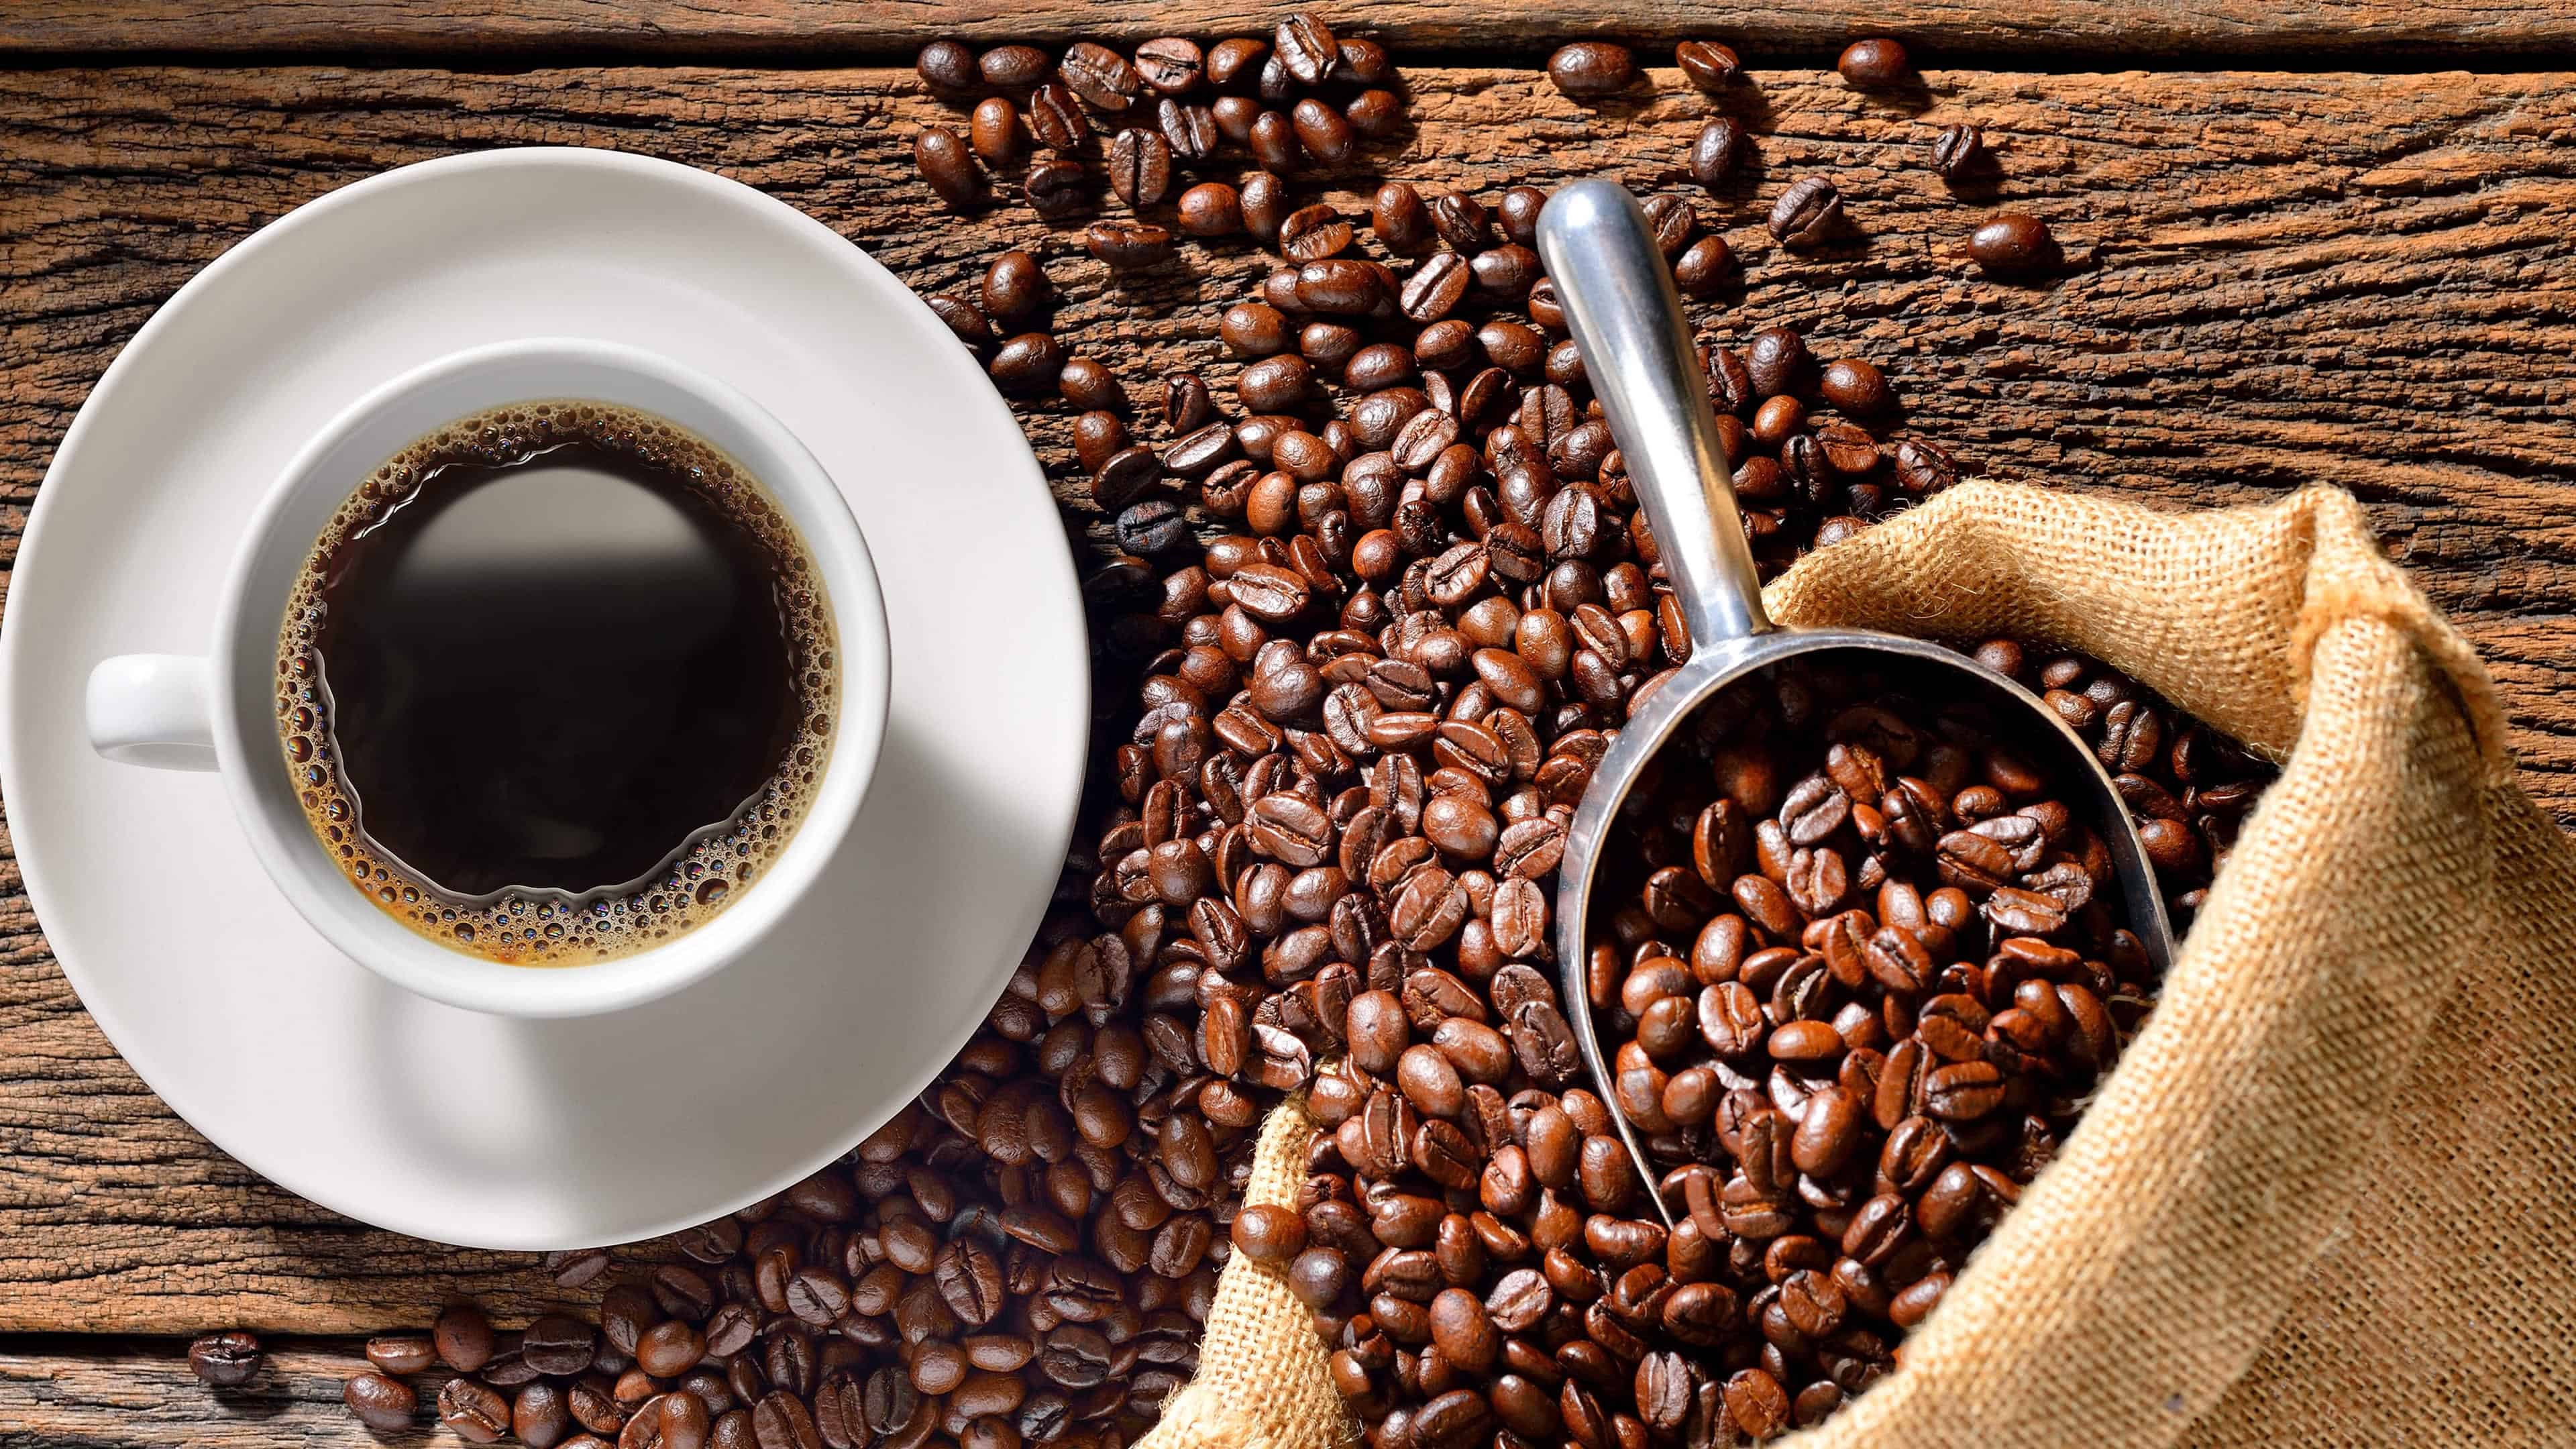 Coffee: Beverage, A stimulating effect on humans, primarily due to its caffeine content. 3840x2160 4K Wallpaper.